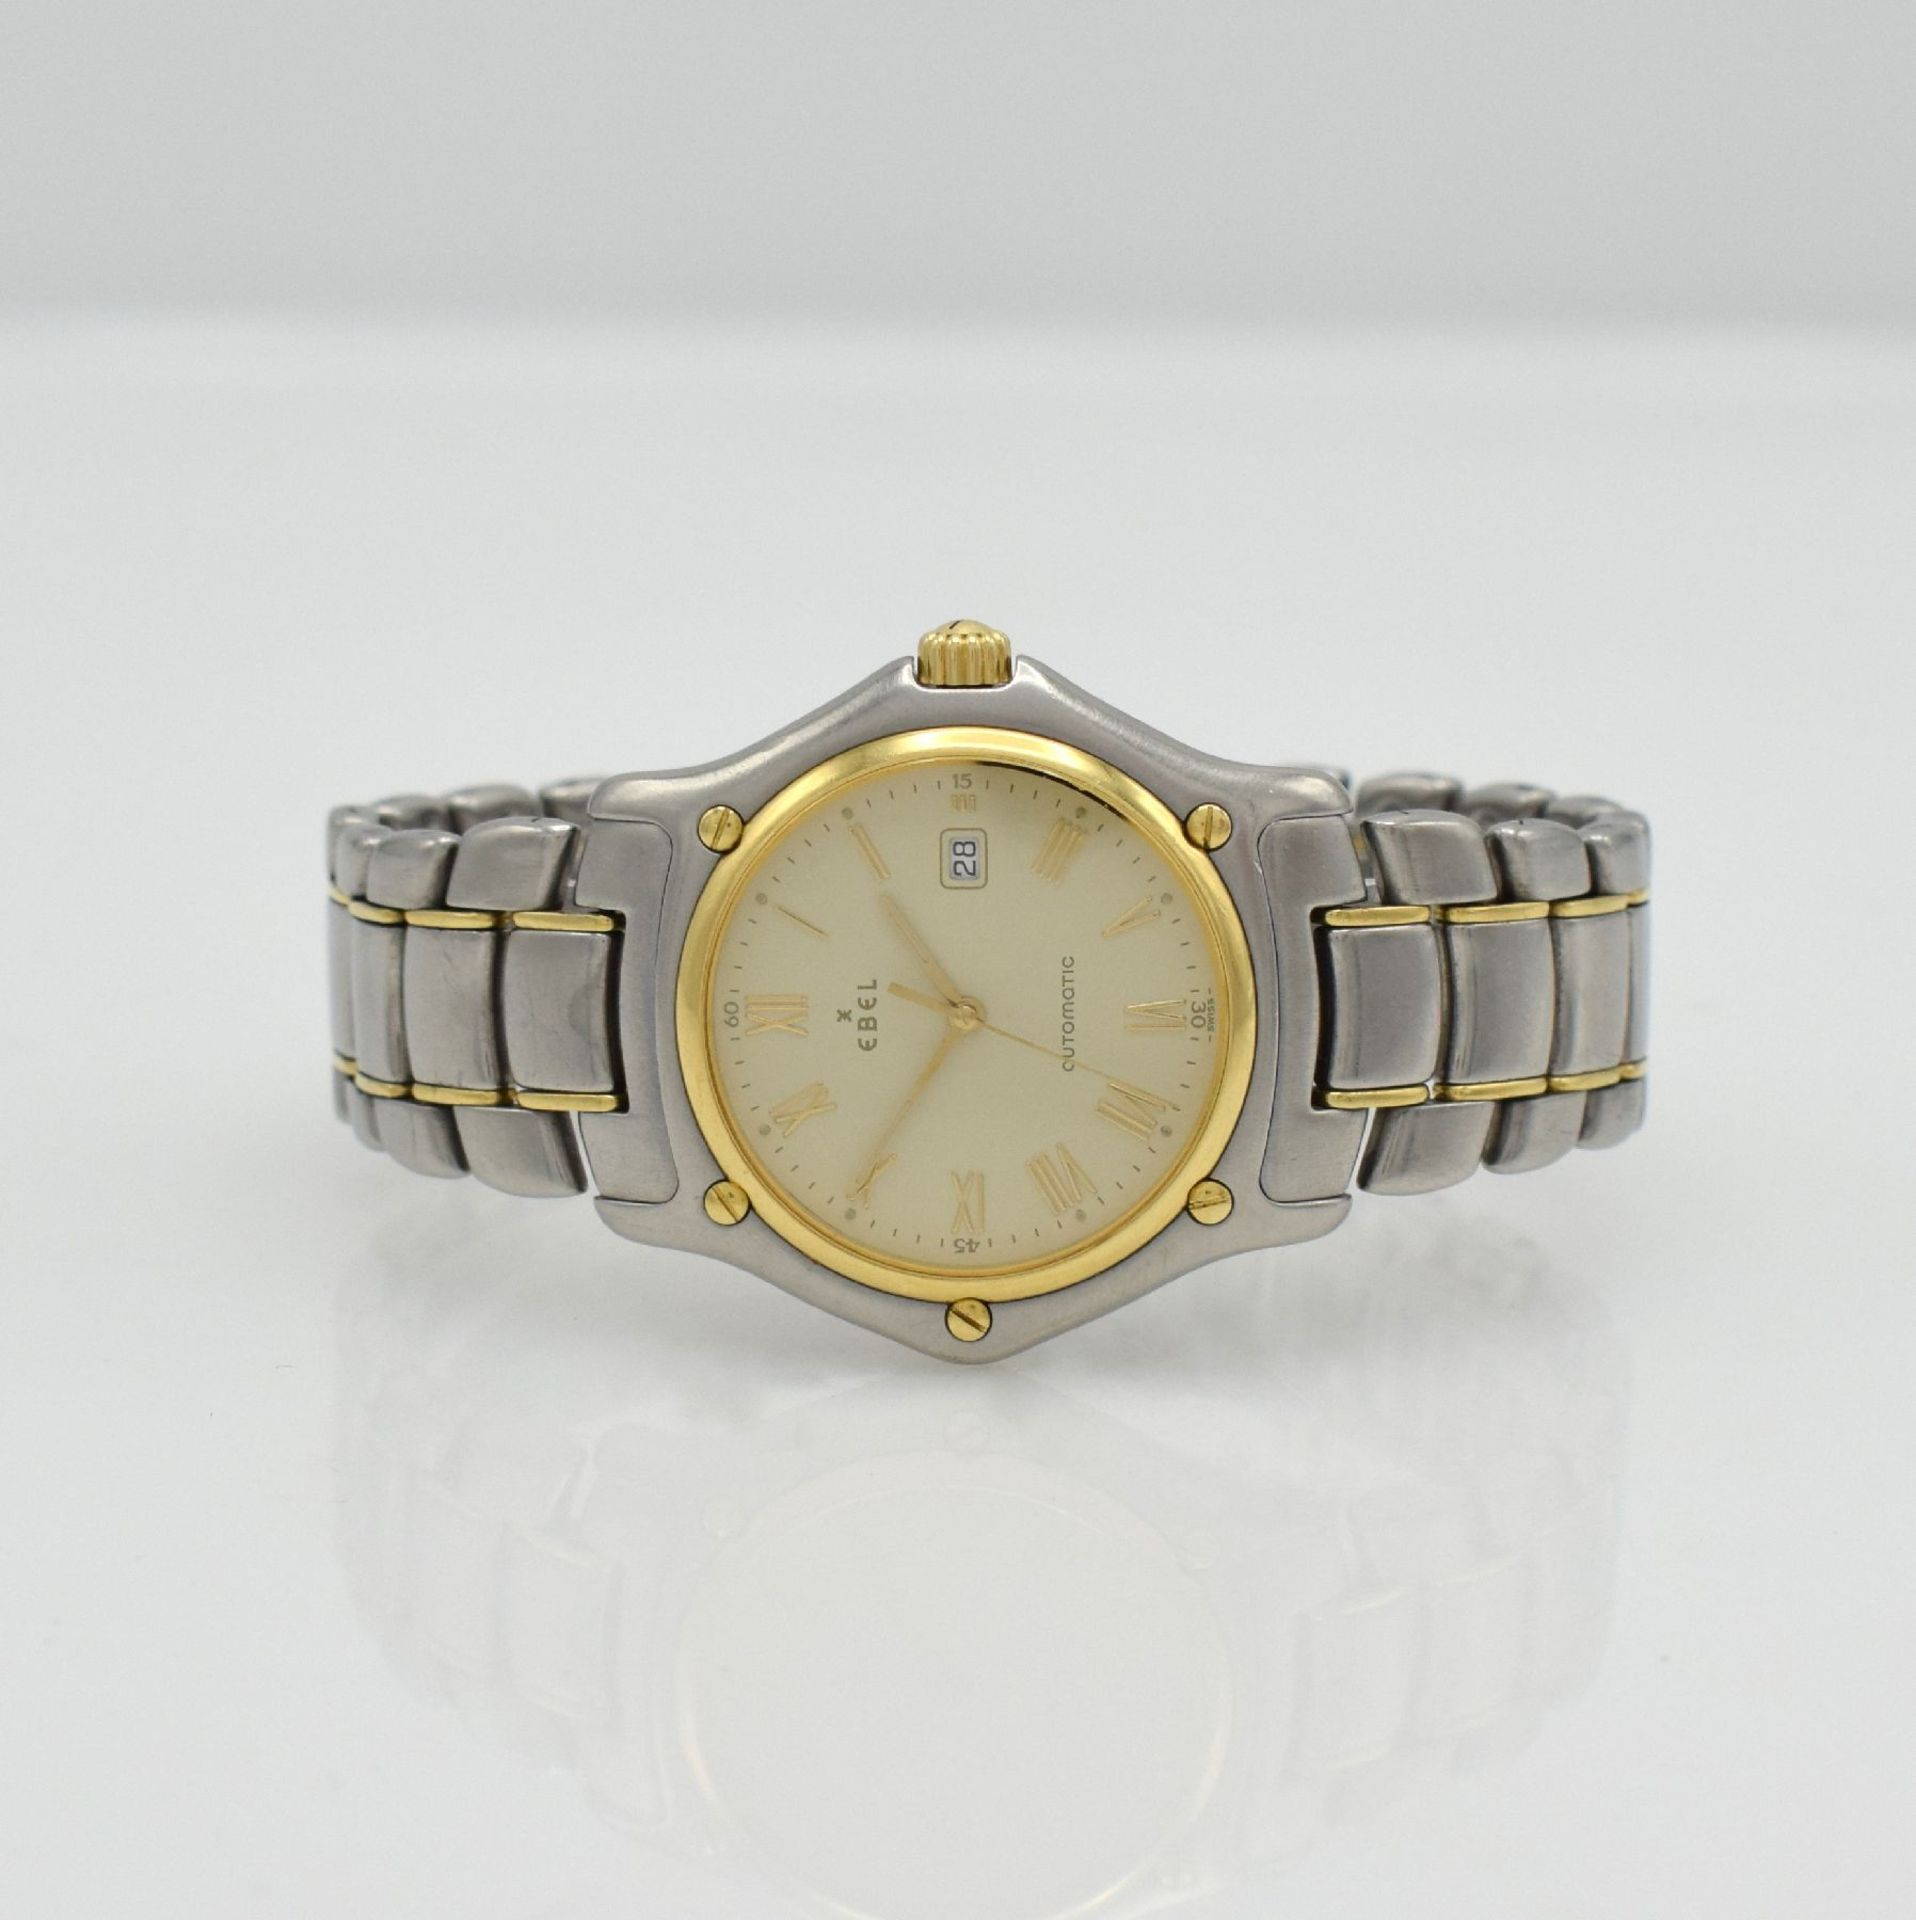 EBEL 1911 wristwatch in stainless steel/gold, Switzerland sold according to warranty card inMay